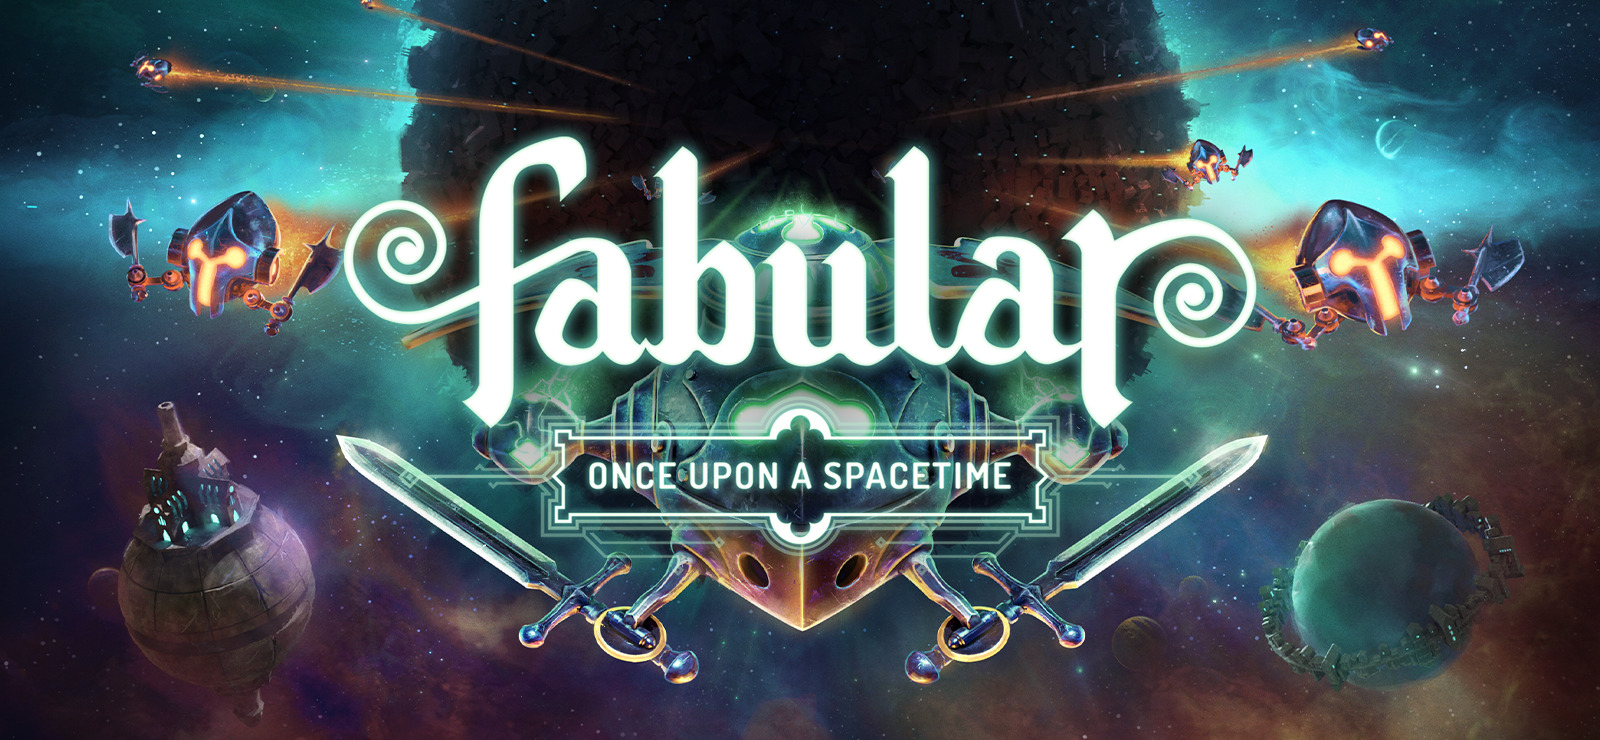 Fabular: Once Upon a Spacetime download the new version